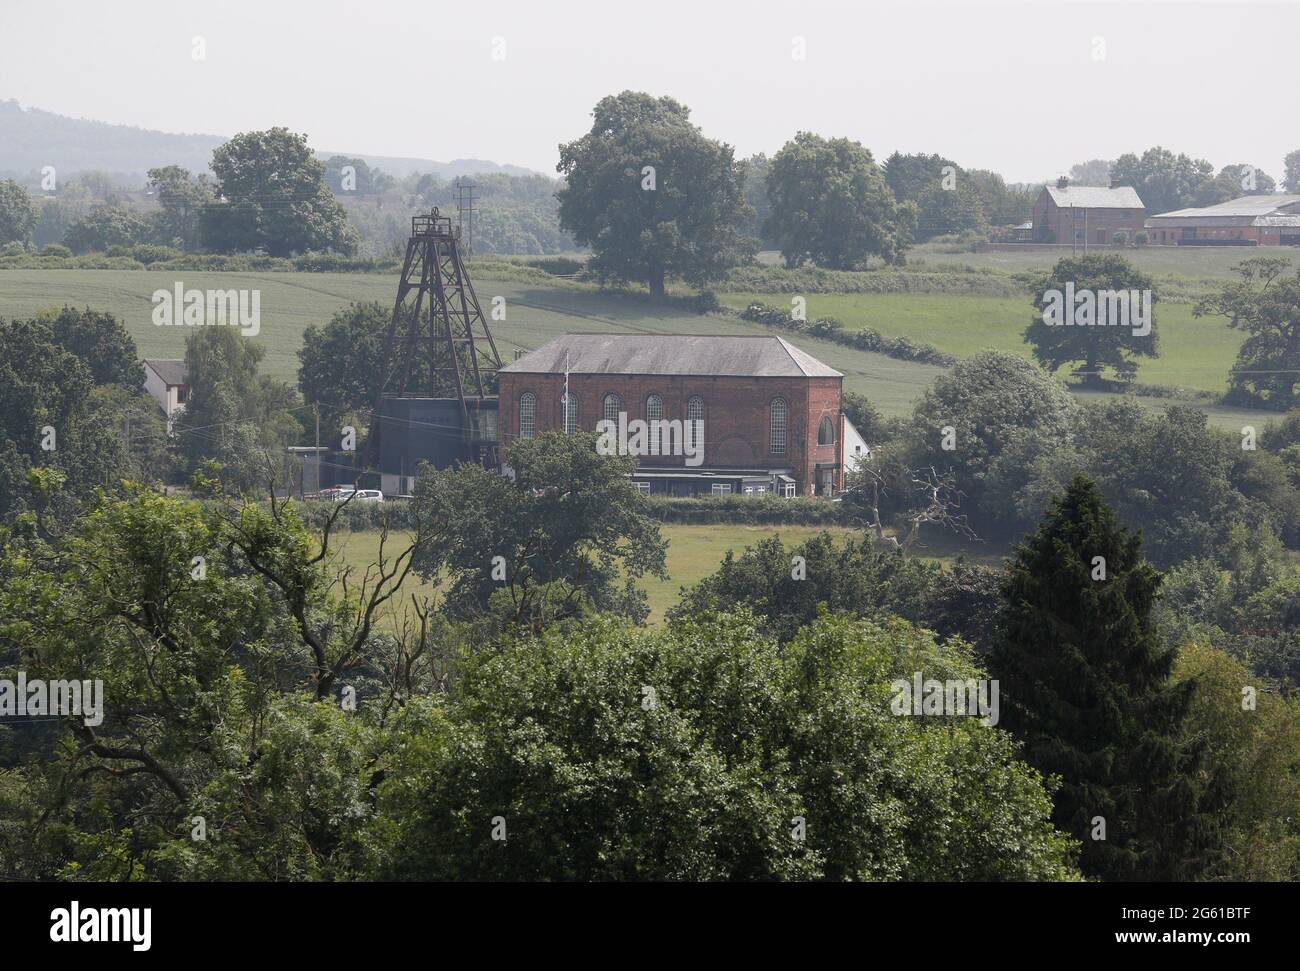 Swannington, Leicestershire, UK. 1st July 2021. A general view of the former Calcutta Colliery. Swannington is a former mining village situated betwee Stock Photo